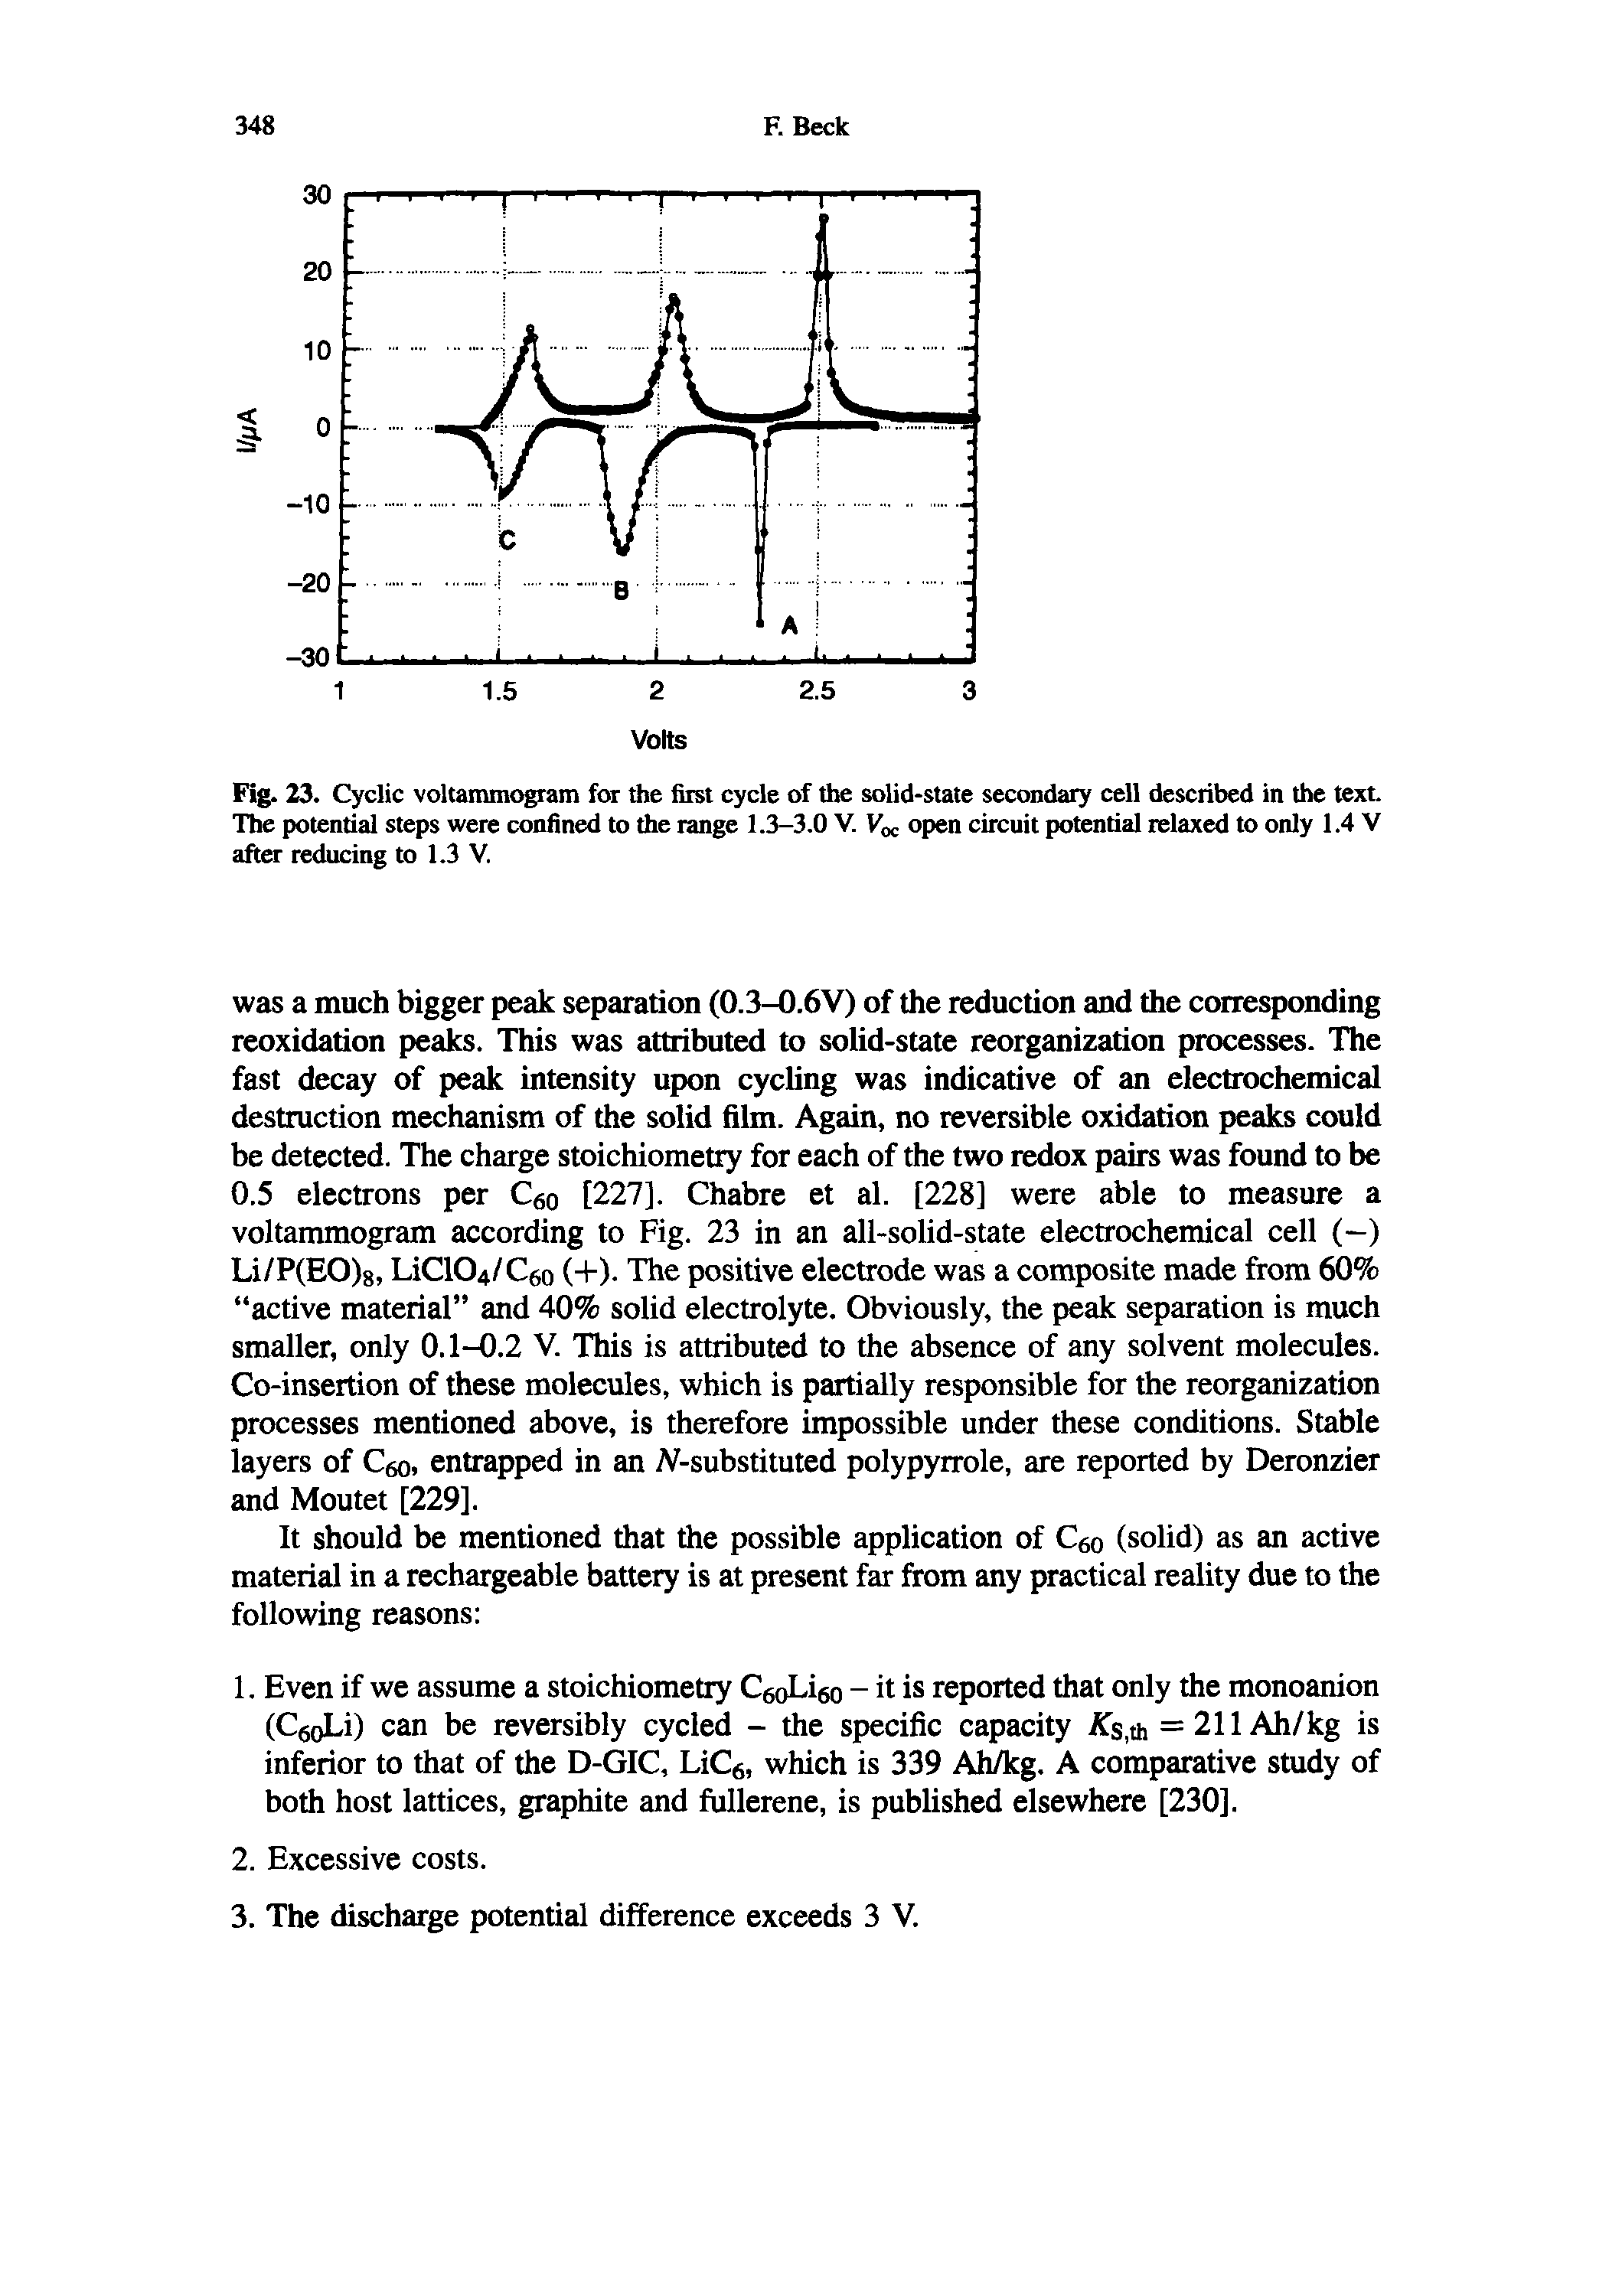 Fig. 23. Cyclic voltammogram for the first cycle of the solid-state secondary cell described in the text. The potential steps were confined to the range 1.3-3.0 V. Voc open circuit potential relaxed to only 1.4 V after reducing to 1.3 V.